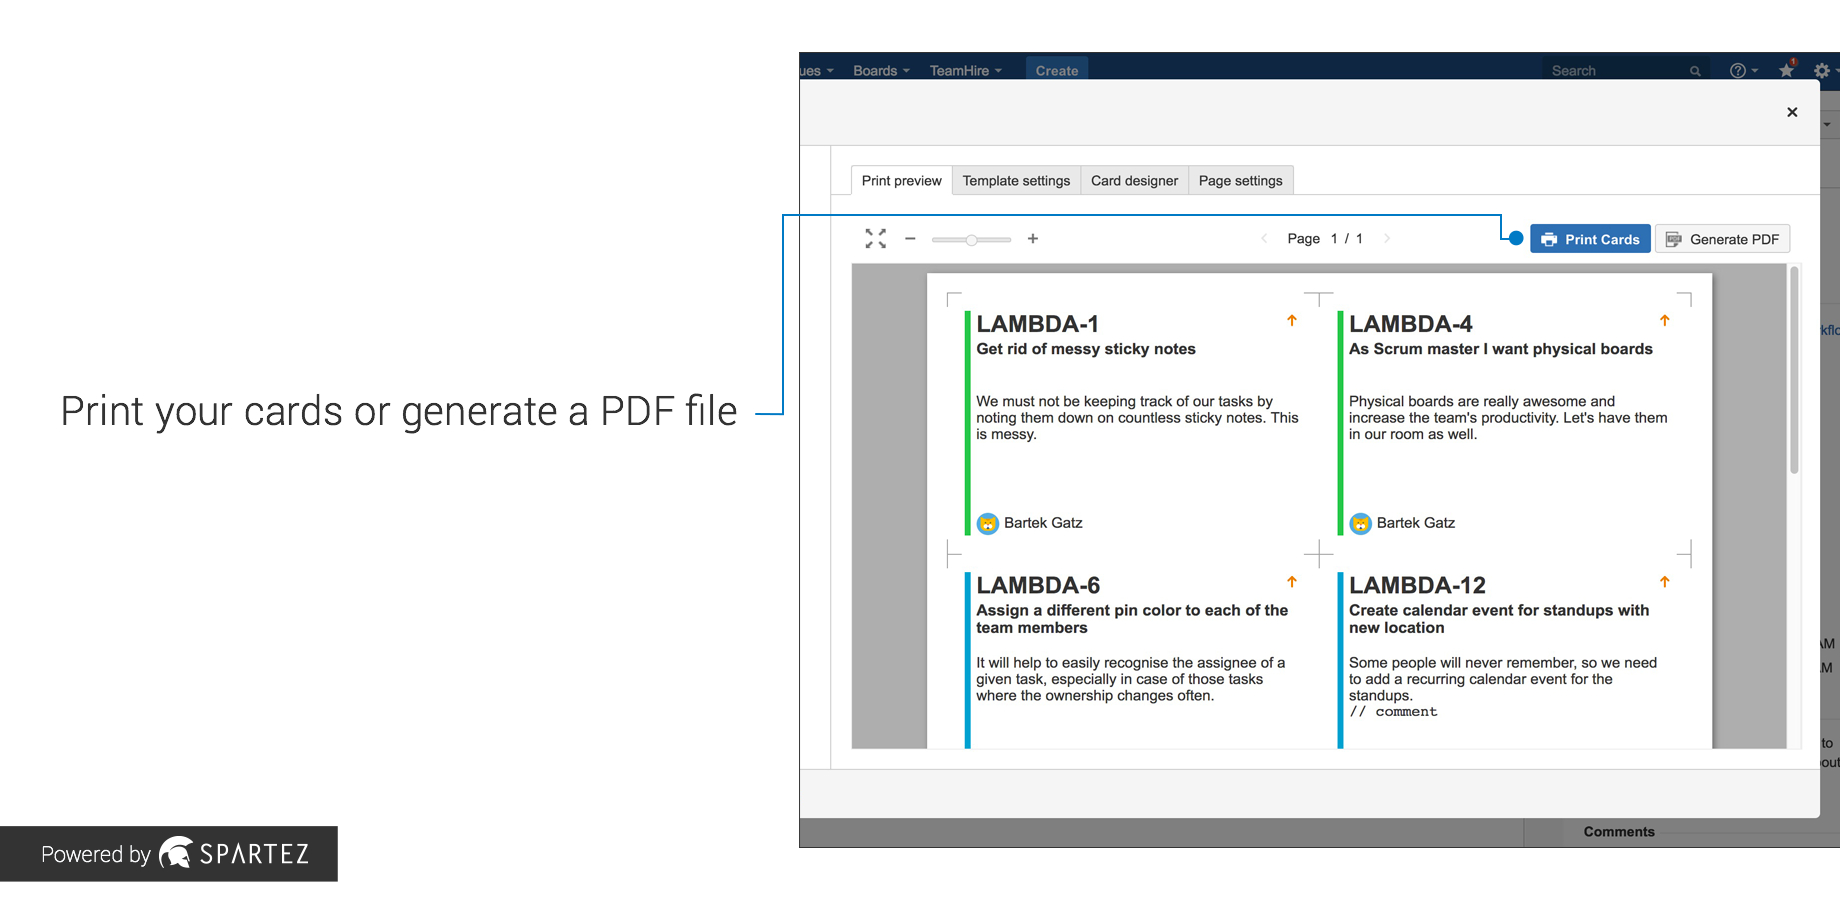 Agile Cards – Print Issues From Jira | Atlassian Marketplace Inside Agile Story Card Template